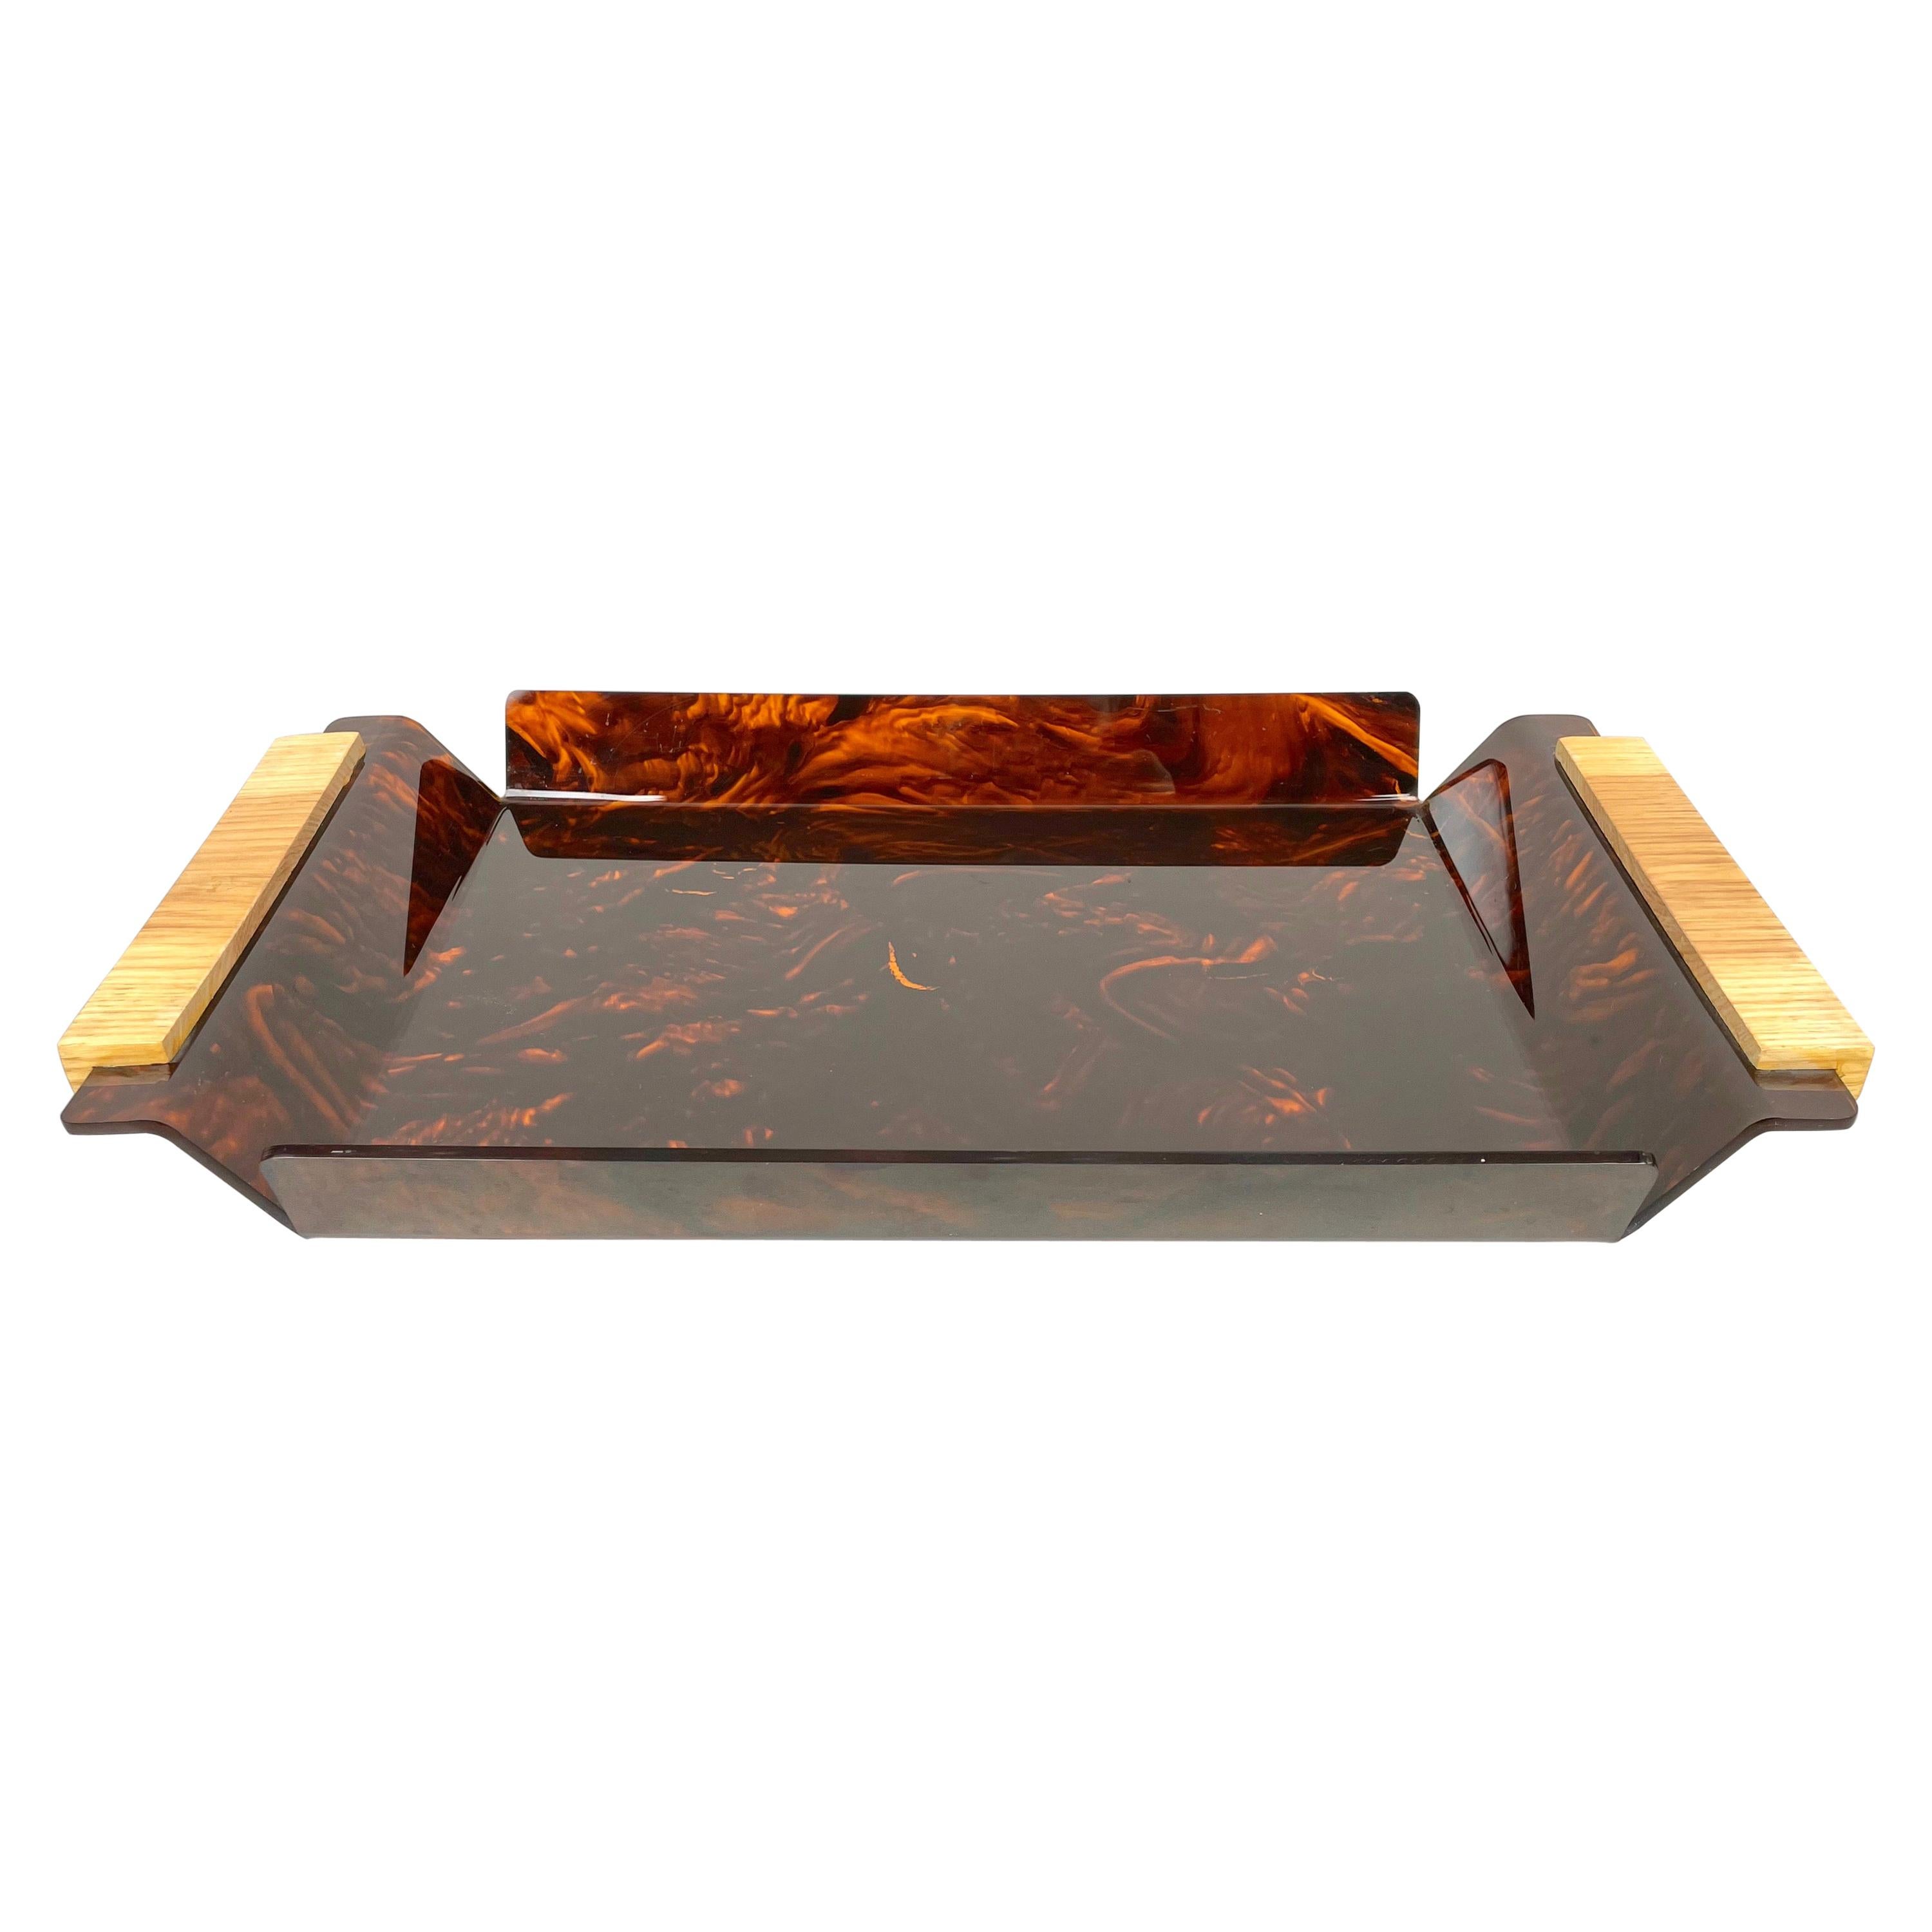 Tortoise Shell Effect Lucite and Wood Serving Tray Centerpiece, Italy, 1970s